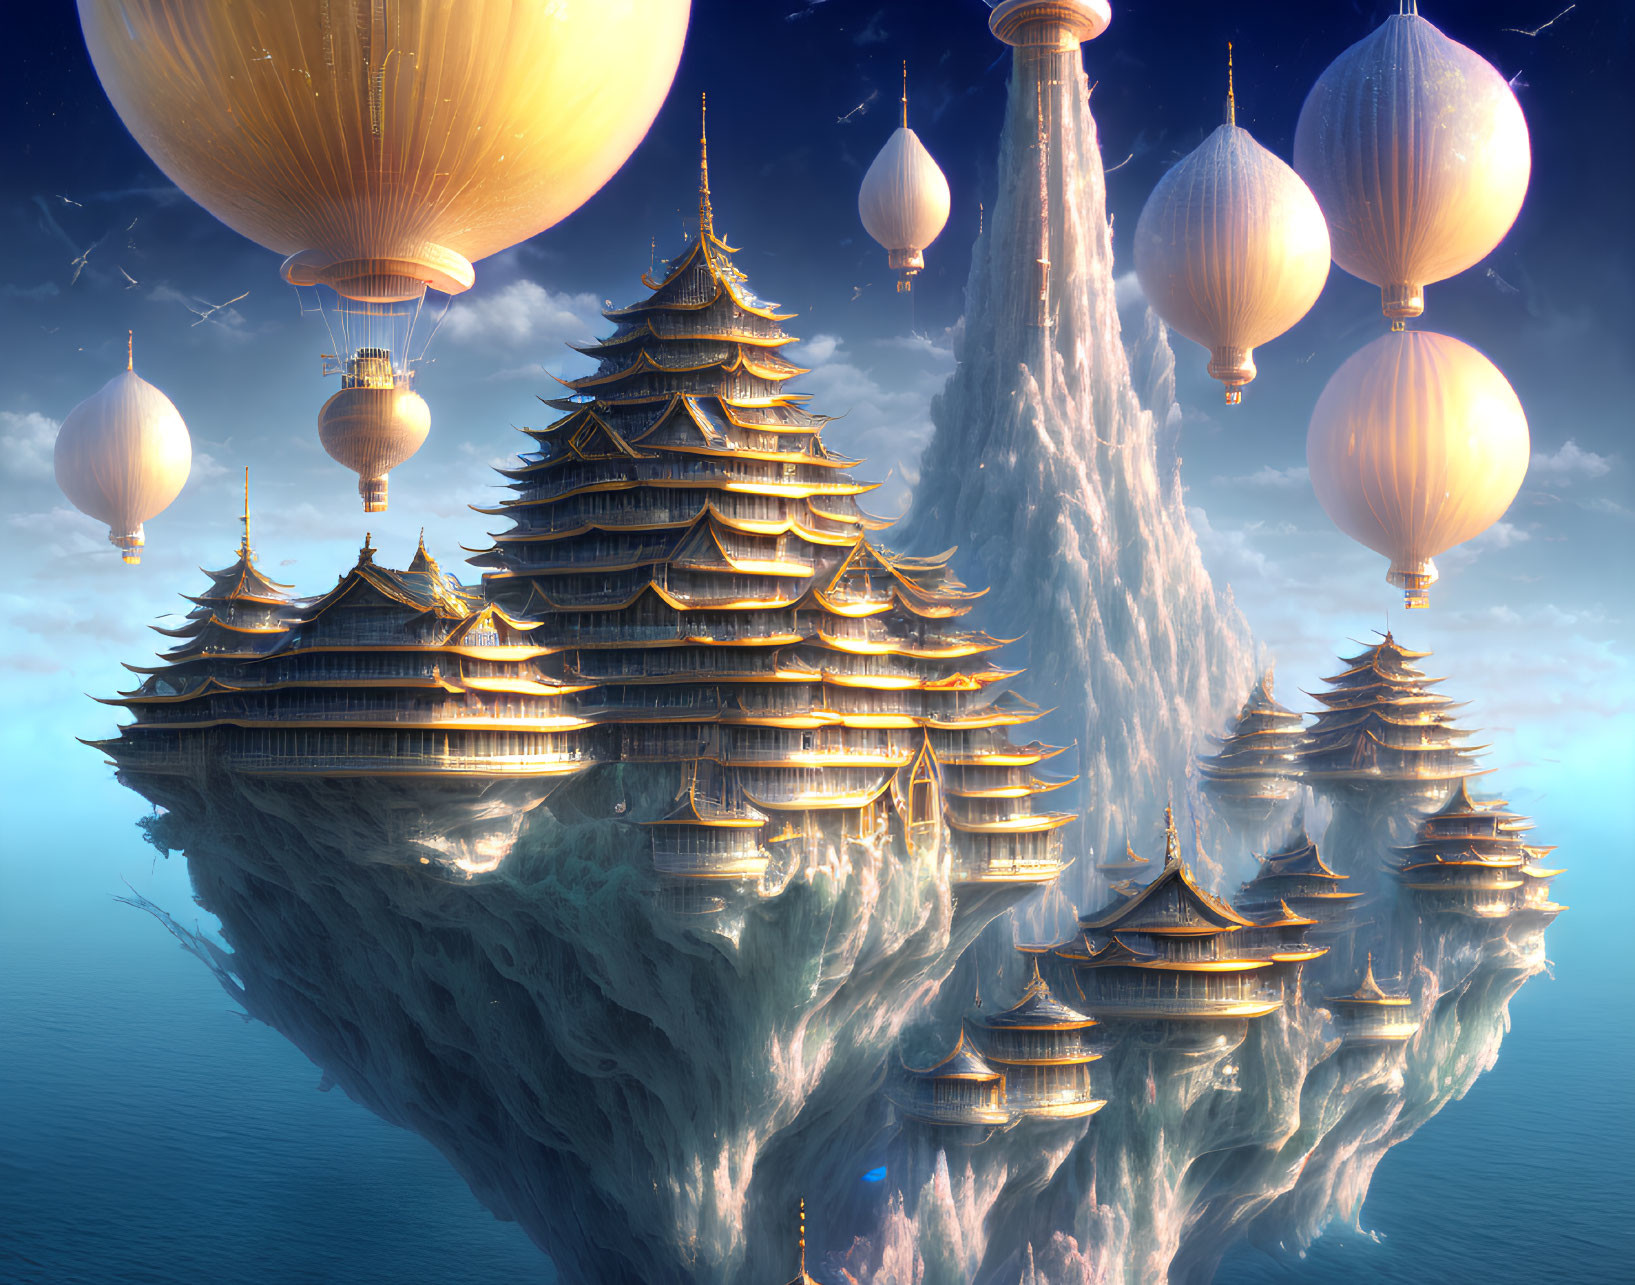 Floating Cities of the Wishing Well Cluster